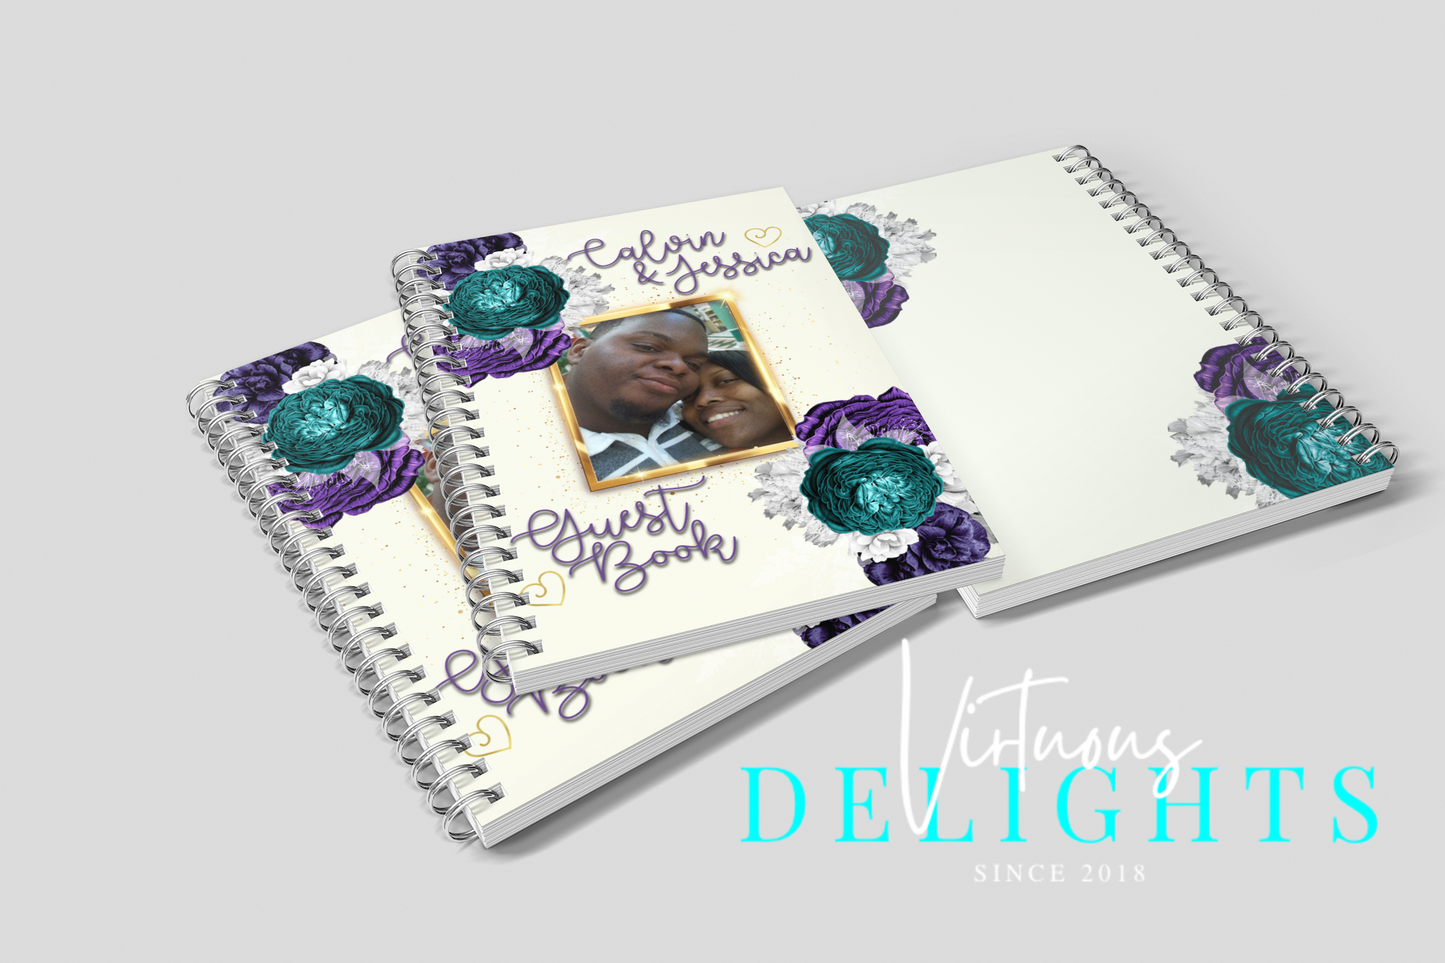 Personalized Wedding Guest Book